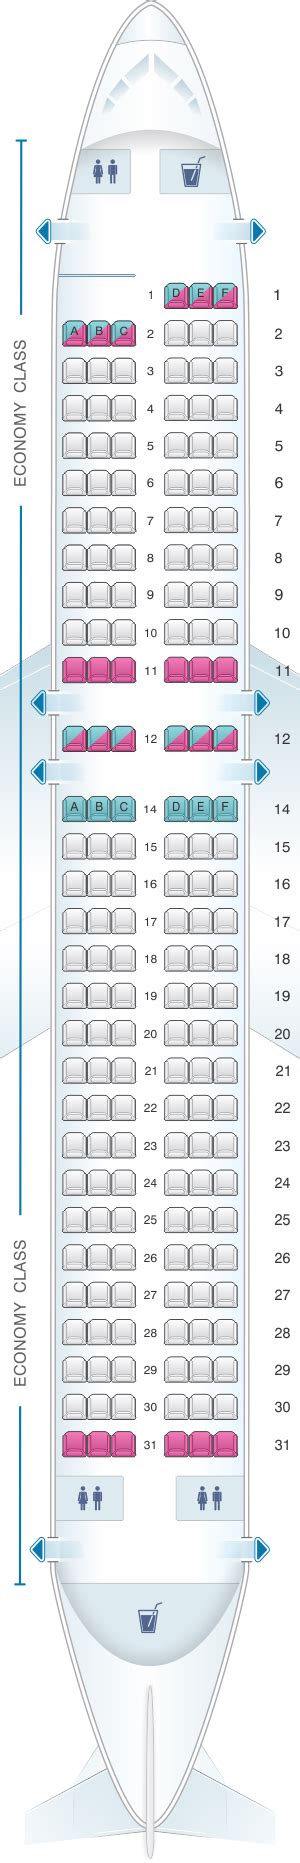 Allegiant airbus a320 seating chart. The AirBlue Airbus A320-200 seat map shows 180 seats configured as: 180 Economy. Economy. Seats 180. Pitch 29-30". Width 18". Recline 3". AirBlue's economy class on the Airbus A320-200 offers a practical solution for travelers. With 180 seats, it's a blend of cost-effectiveness and essential amenities. 